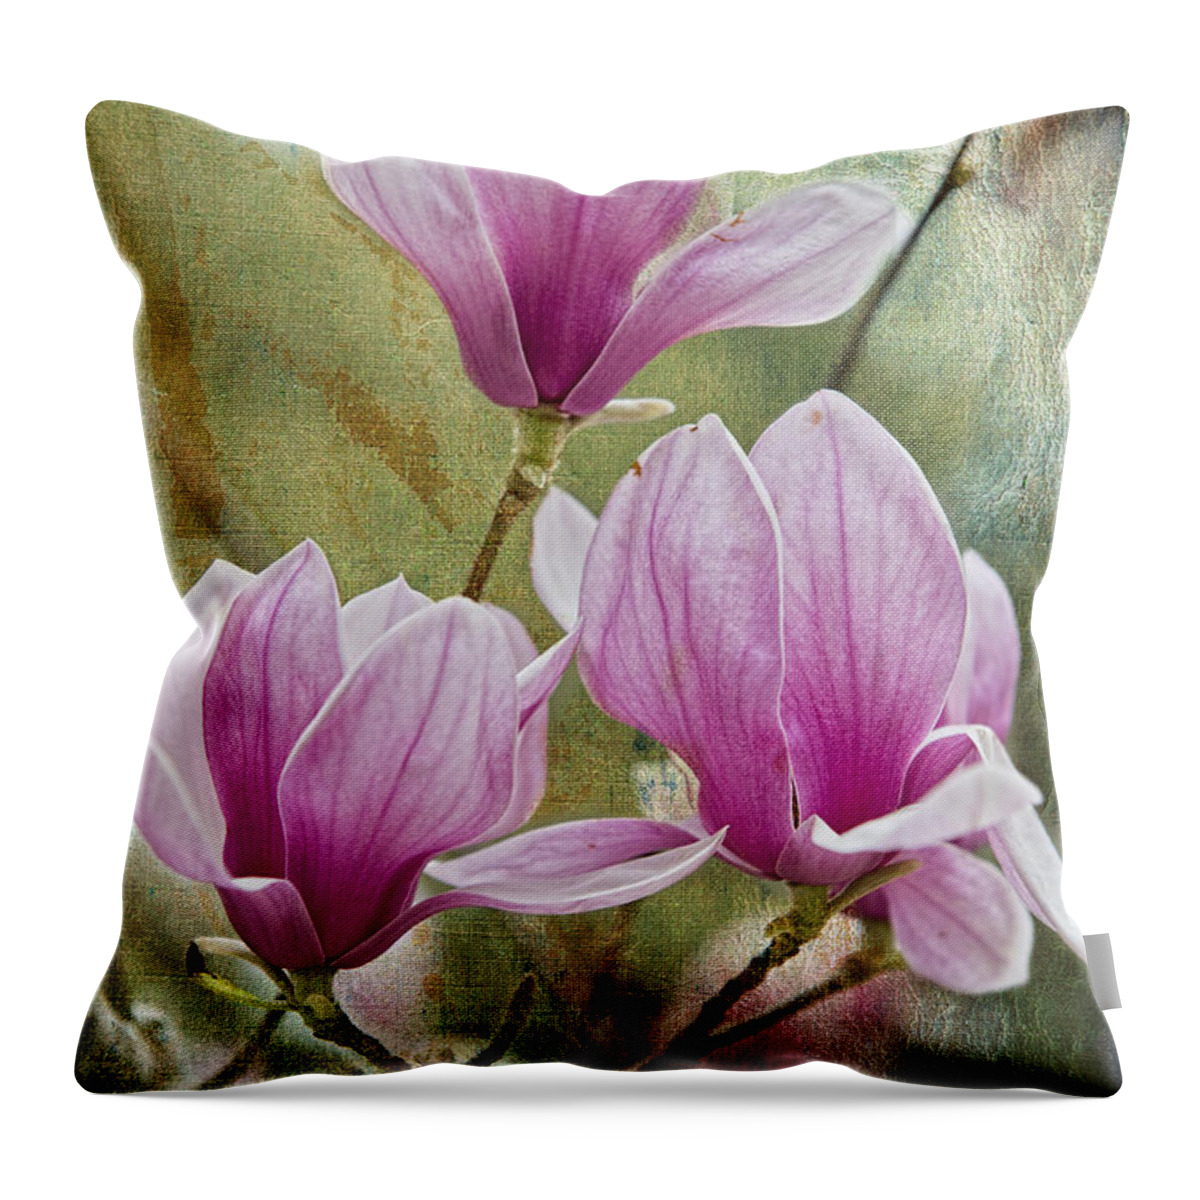 Japanese Magnolias Throw Pillow featuring the photograph Japanese Magnolias at Avery Island by Bonnie Barry